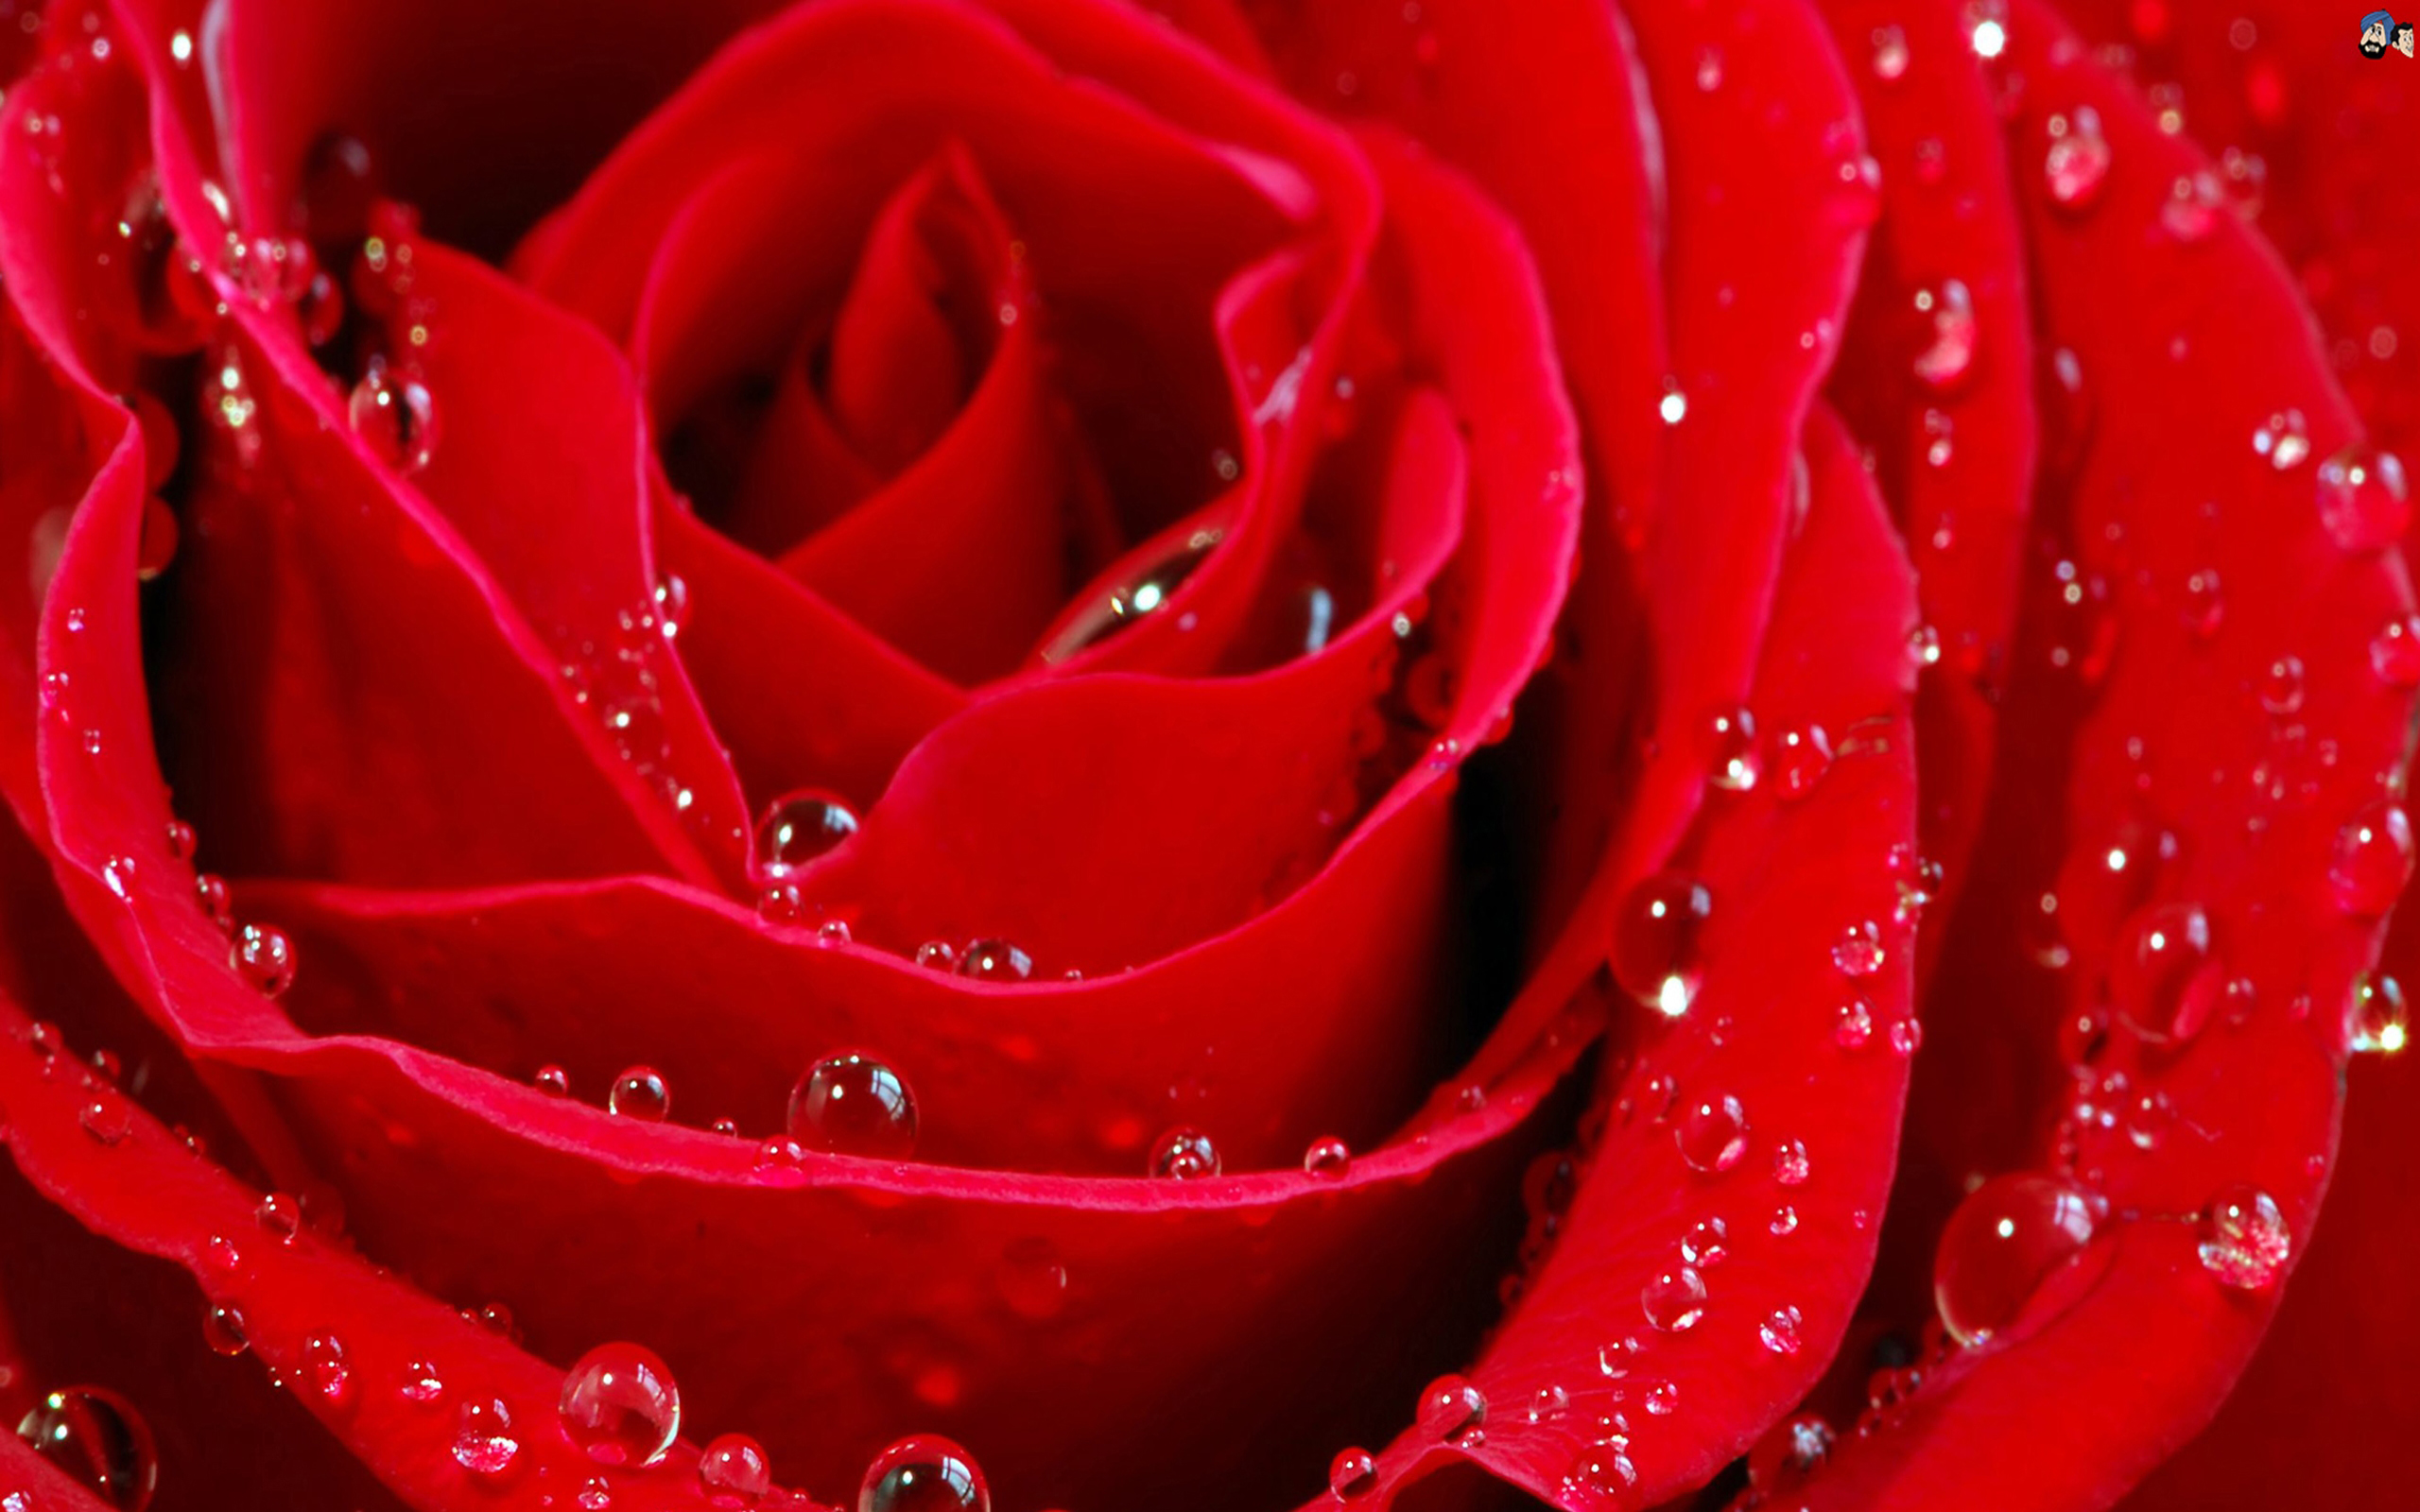 Download A Brightly Colored Roses Red White Petals 2560 × 1600 free HD Wall...